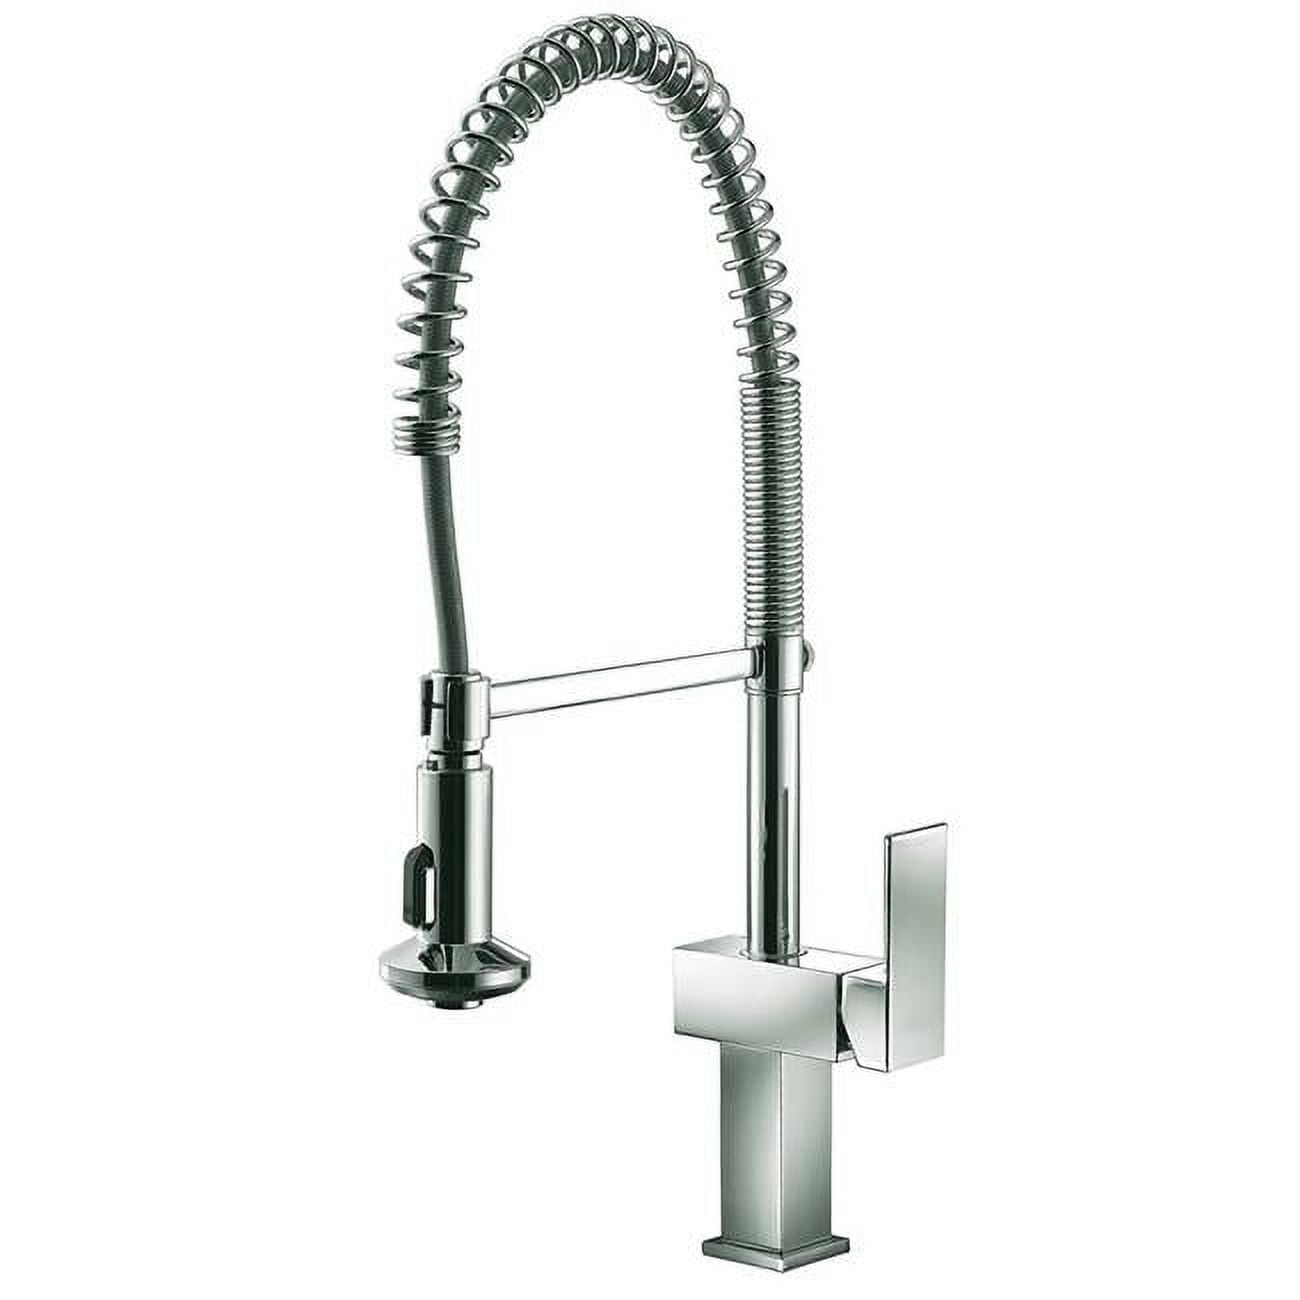 Ab53 3498bn Single-lever Pull-down Kitchen Faucet, Brushed Nickel